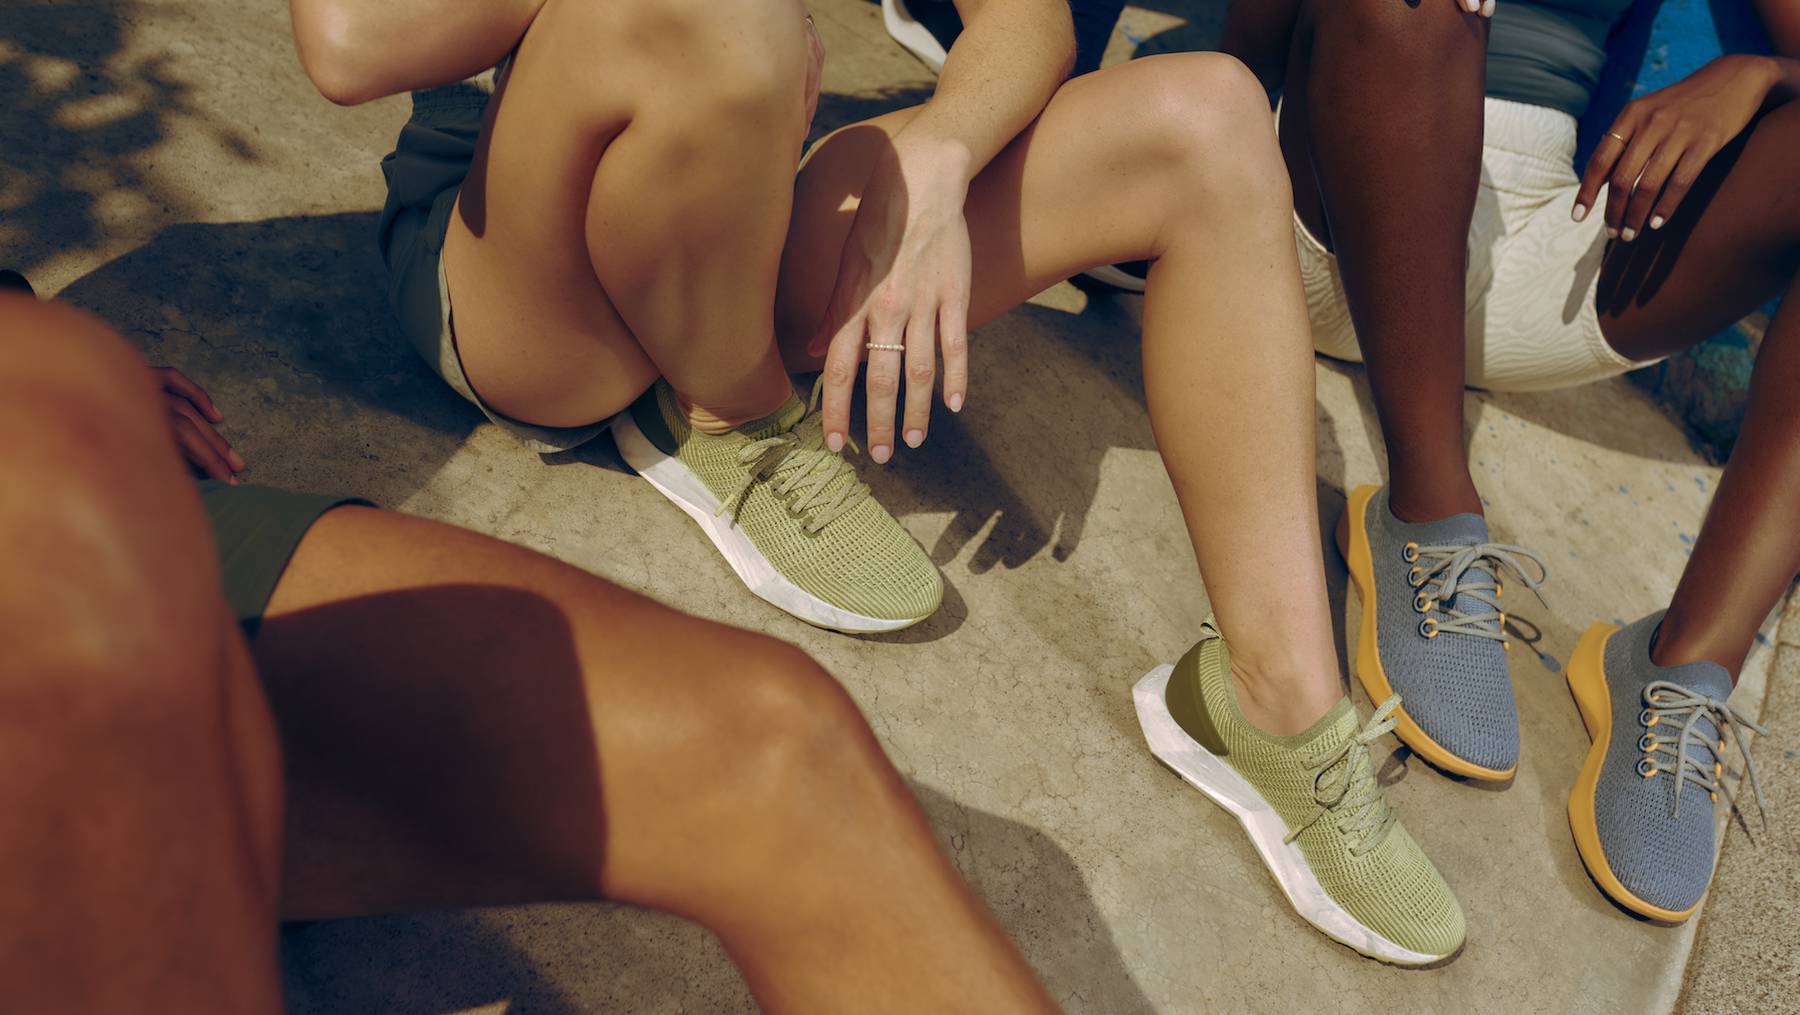 A group of models are shown sitting wearing pairs of green and blue wool Allbirds runners. Only their legs are shown.